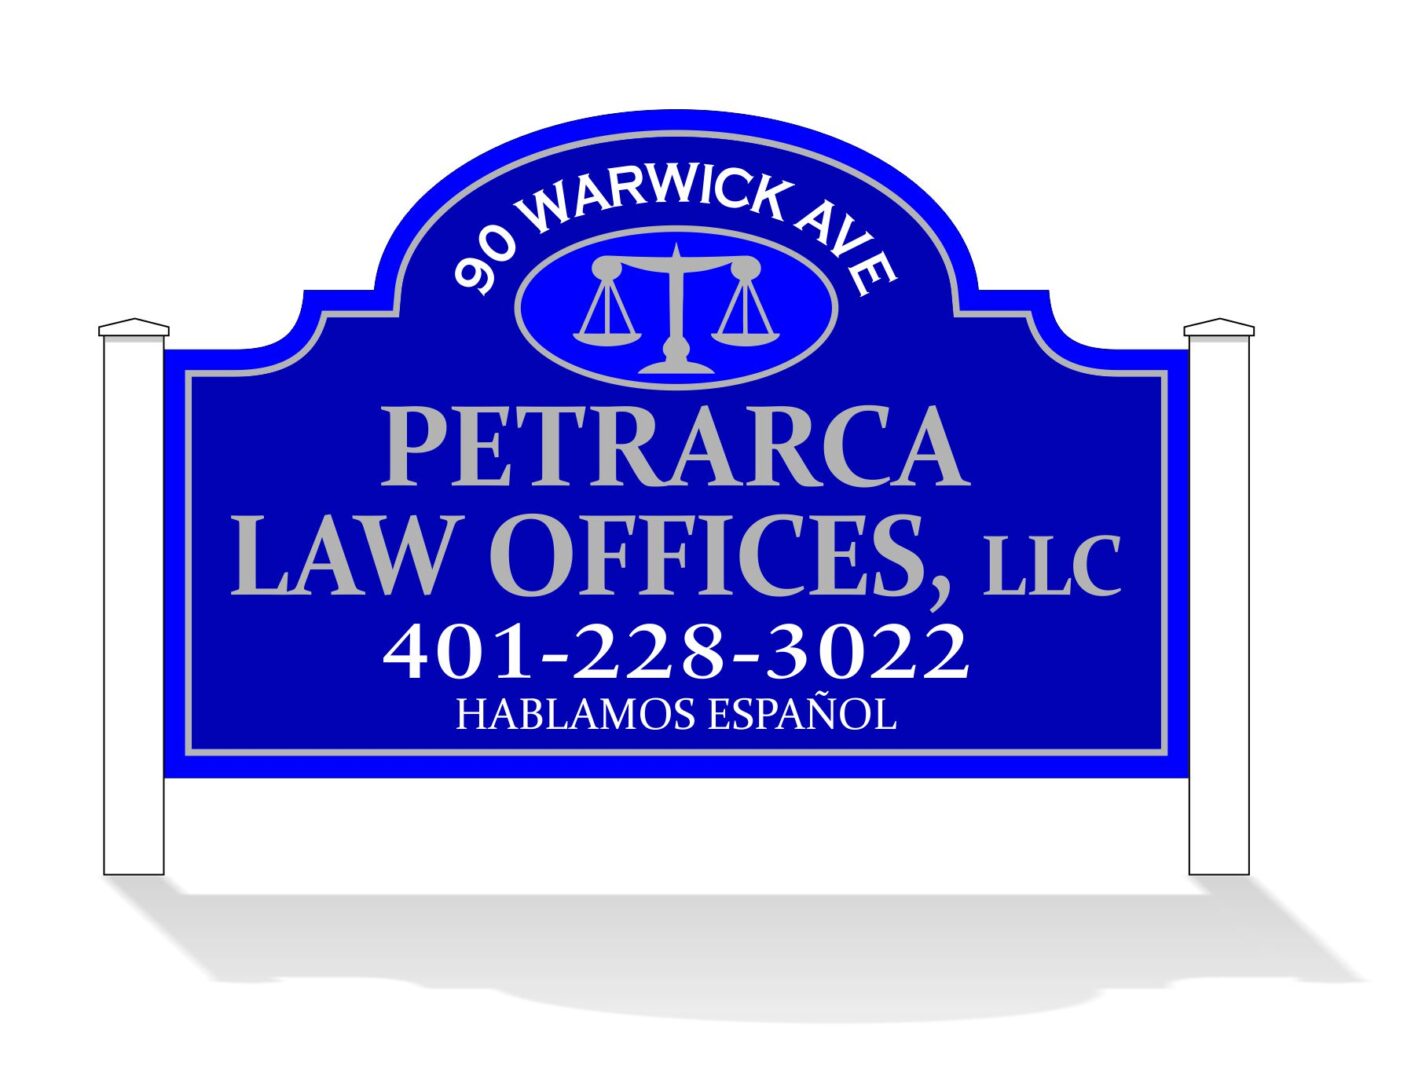 A blue sign that says petarca law offices, llc.